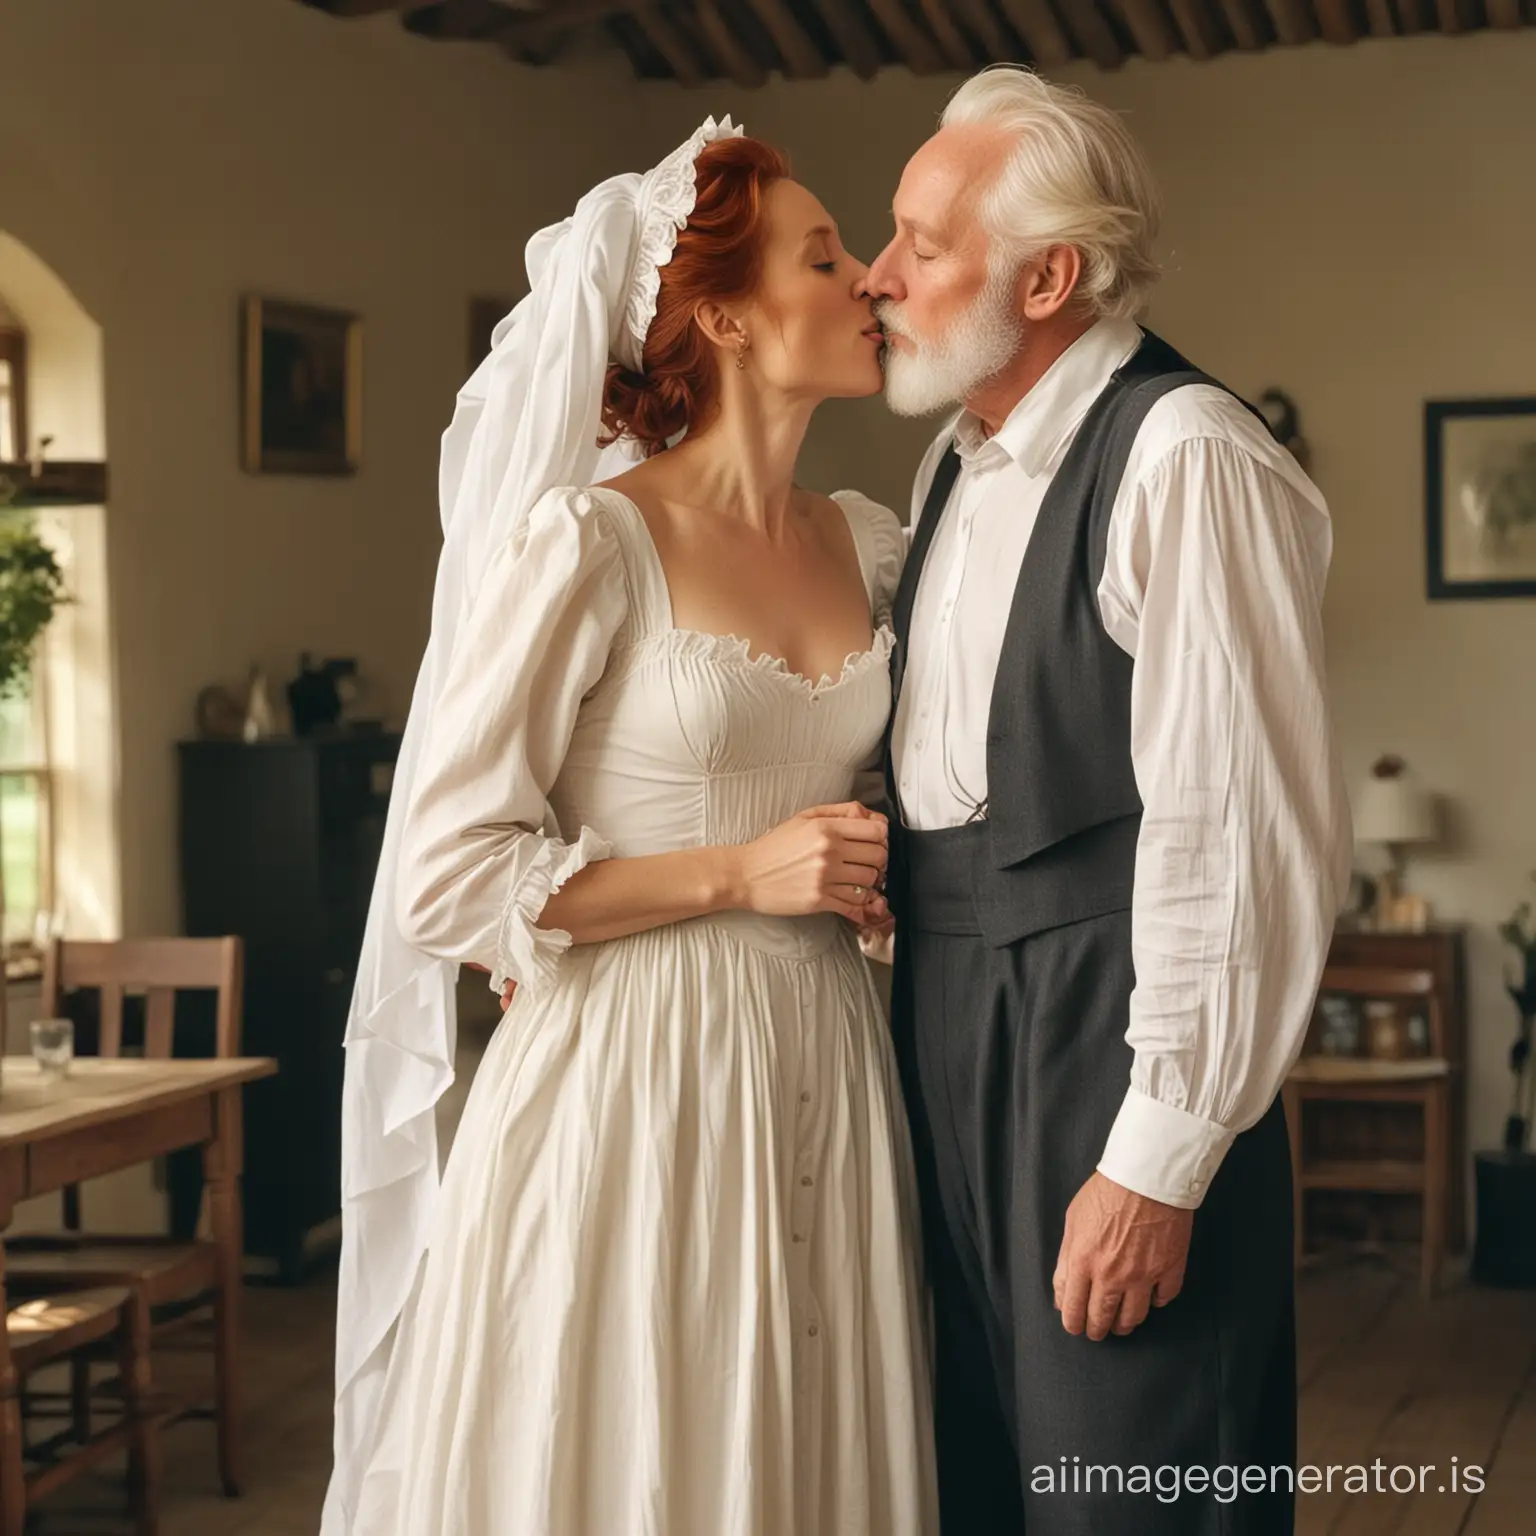 red haired Gillian Anderson wearing a floor-length loose billowing puritan maxi dress with an apron and a white bonnet kissing an old man who seems to be her newlywed husband